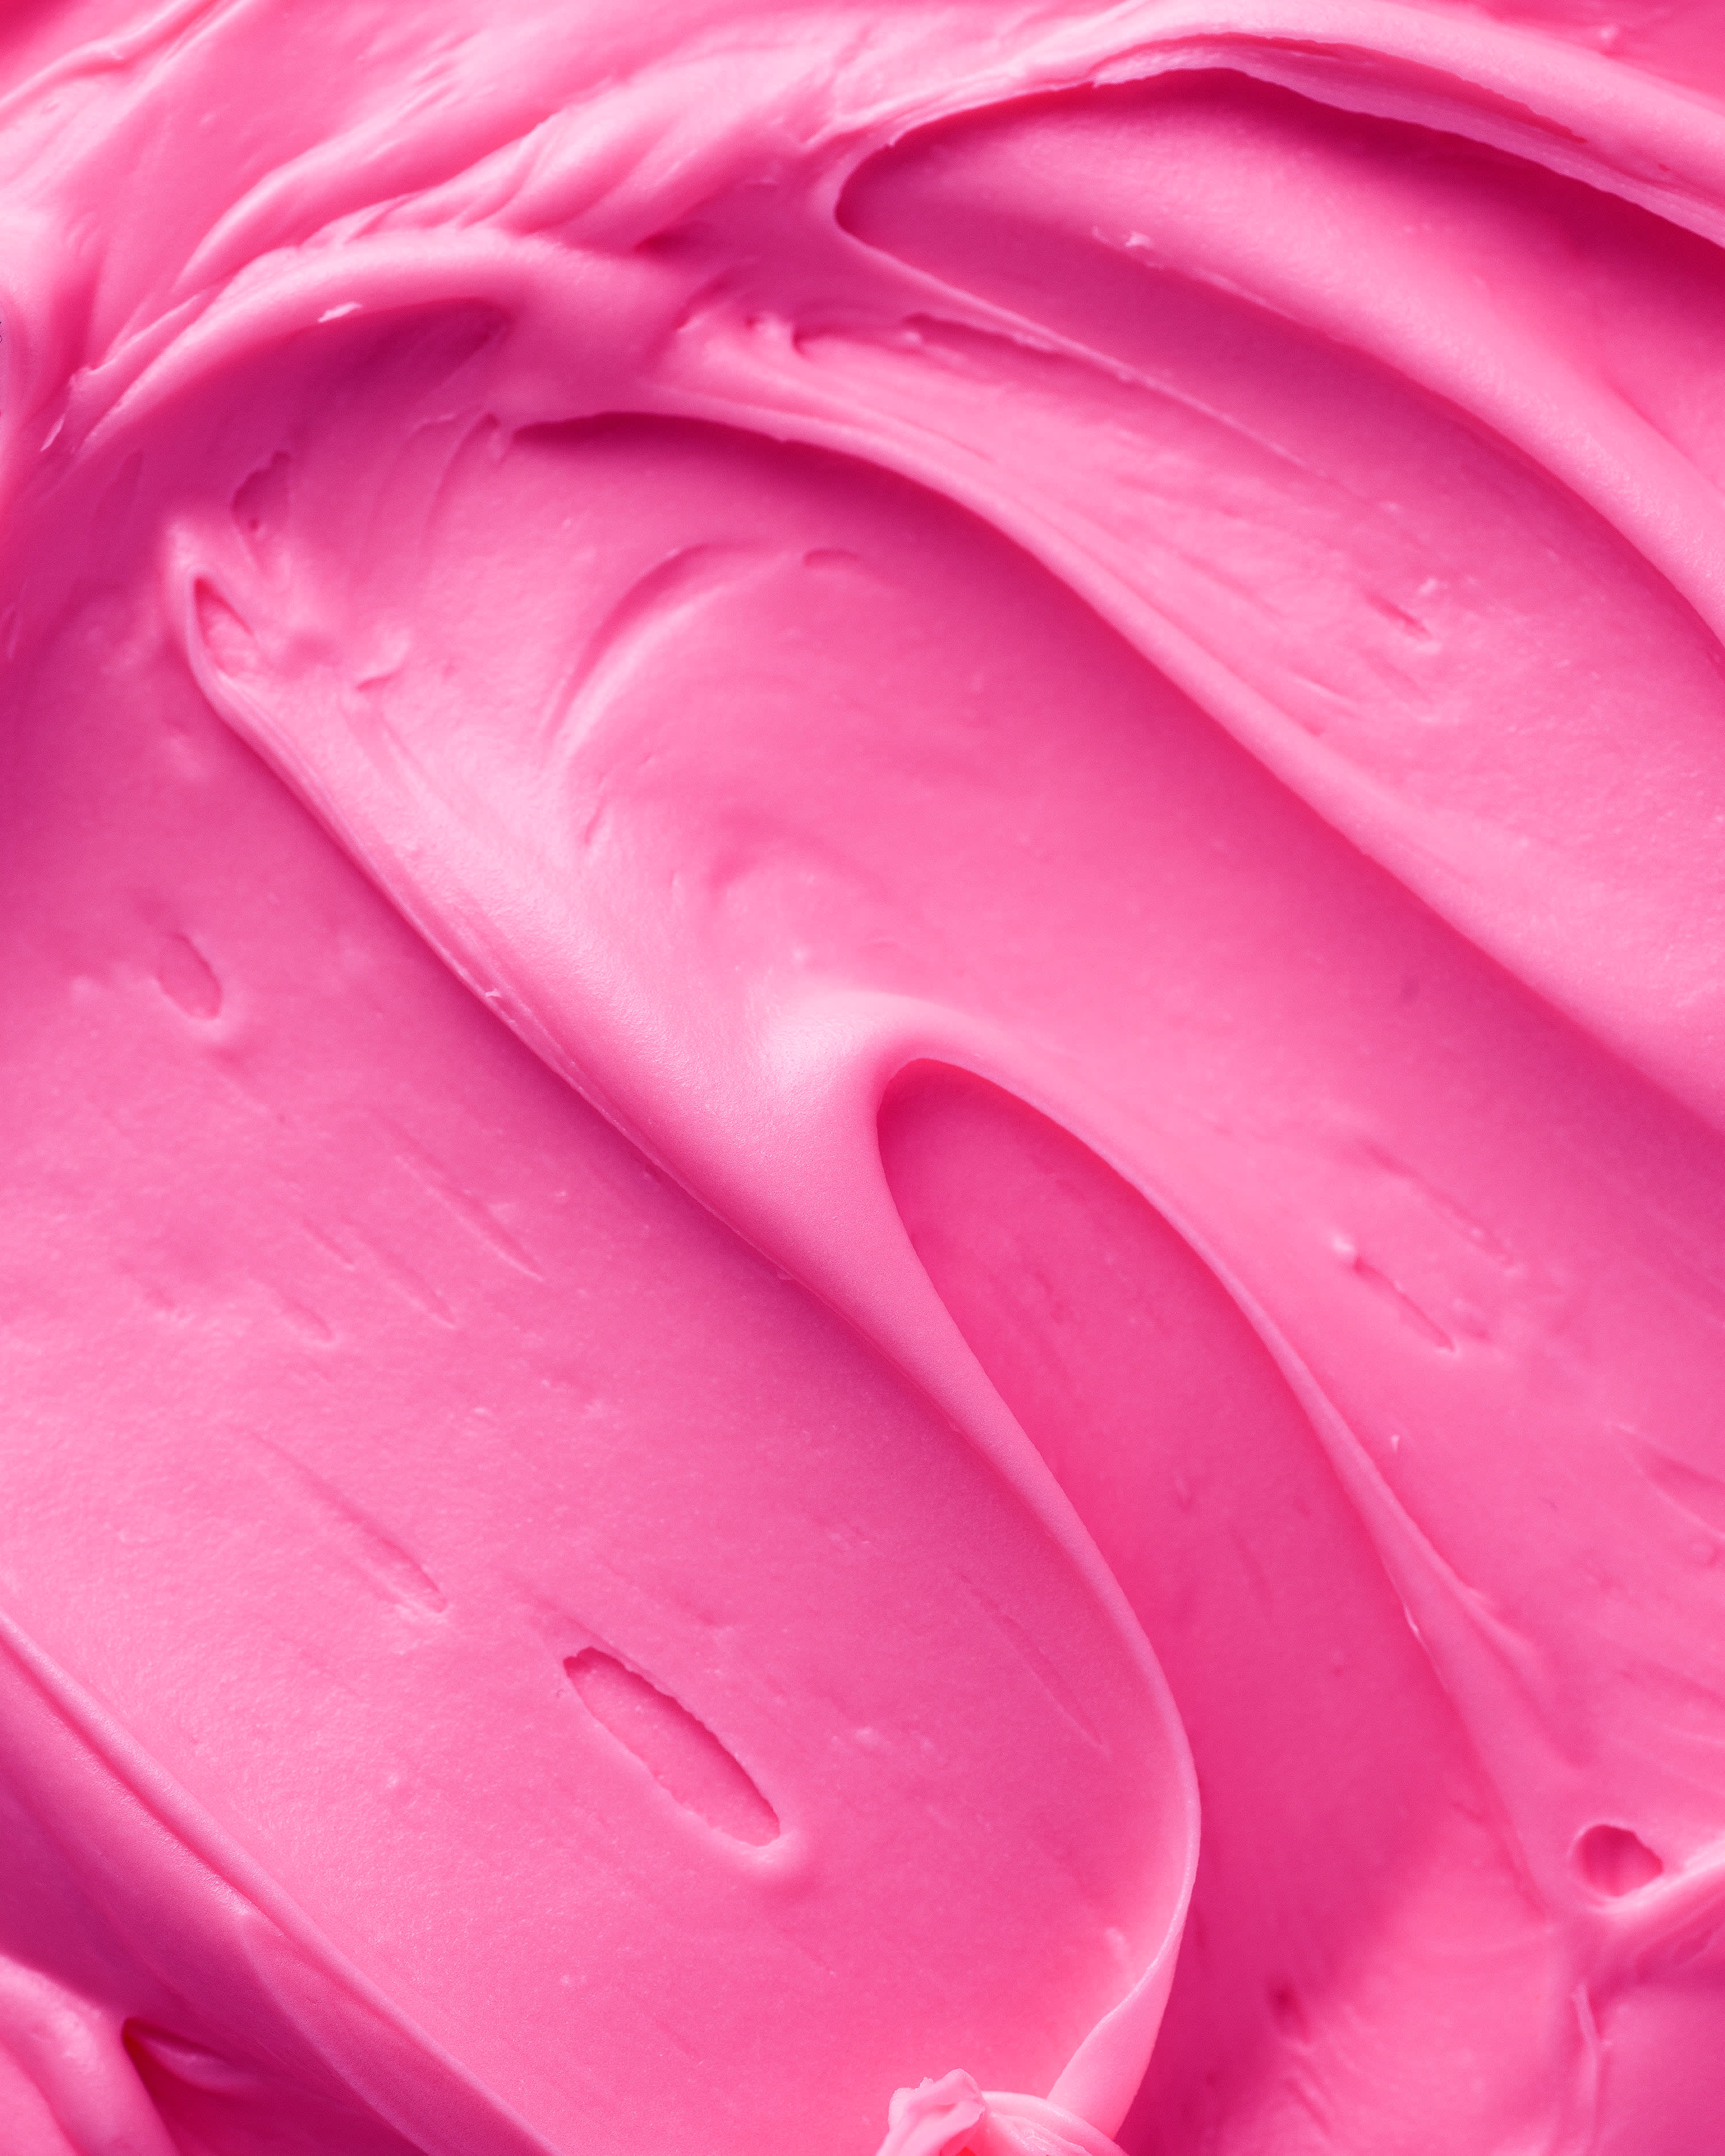 Try This Clever Hack for Making Super Vibrant Buttercream